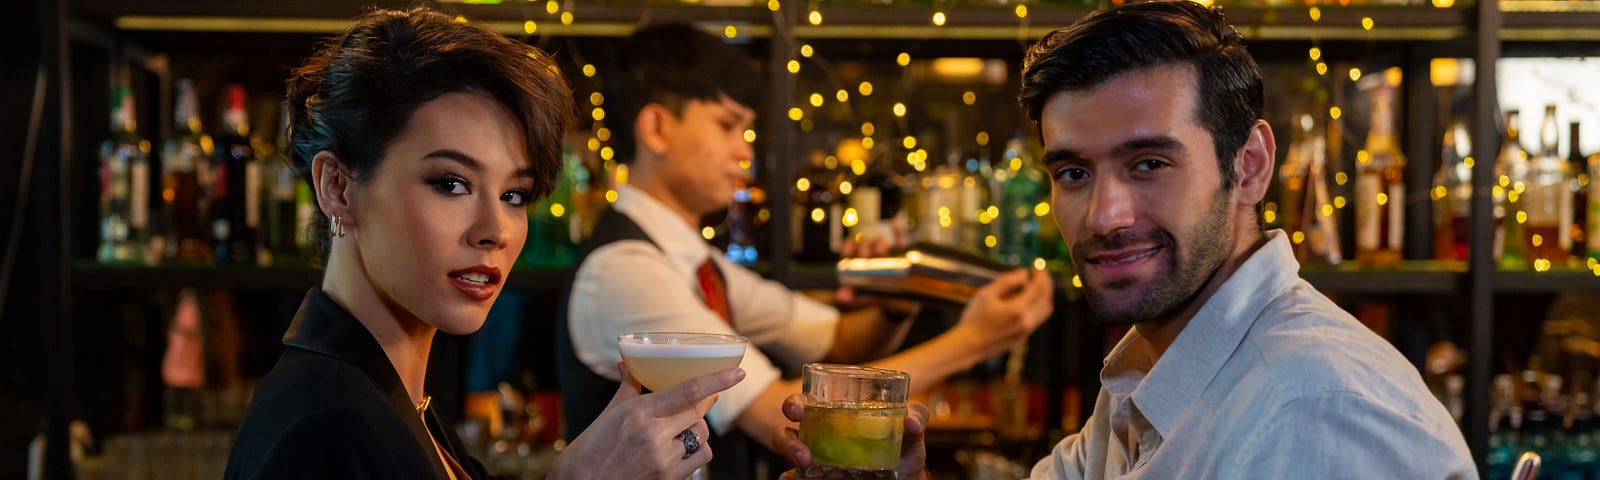 An attractive man and woman are sitting at a bar, looking directly at the viewer, seductively raising their cocktail glasses as if inviting the viewer to join them.